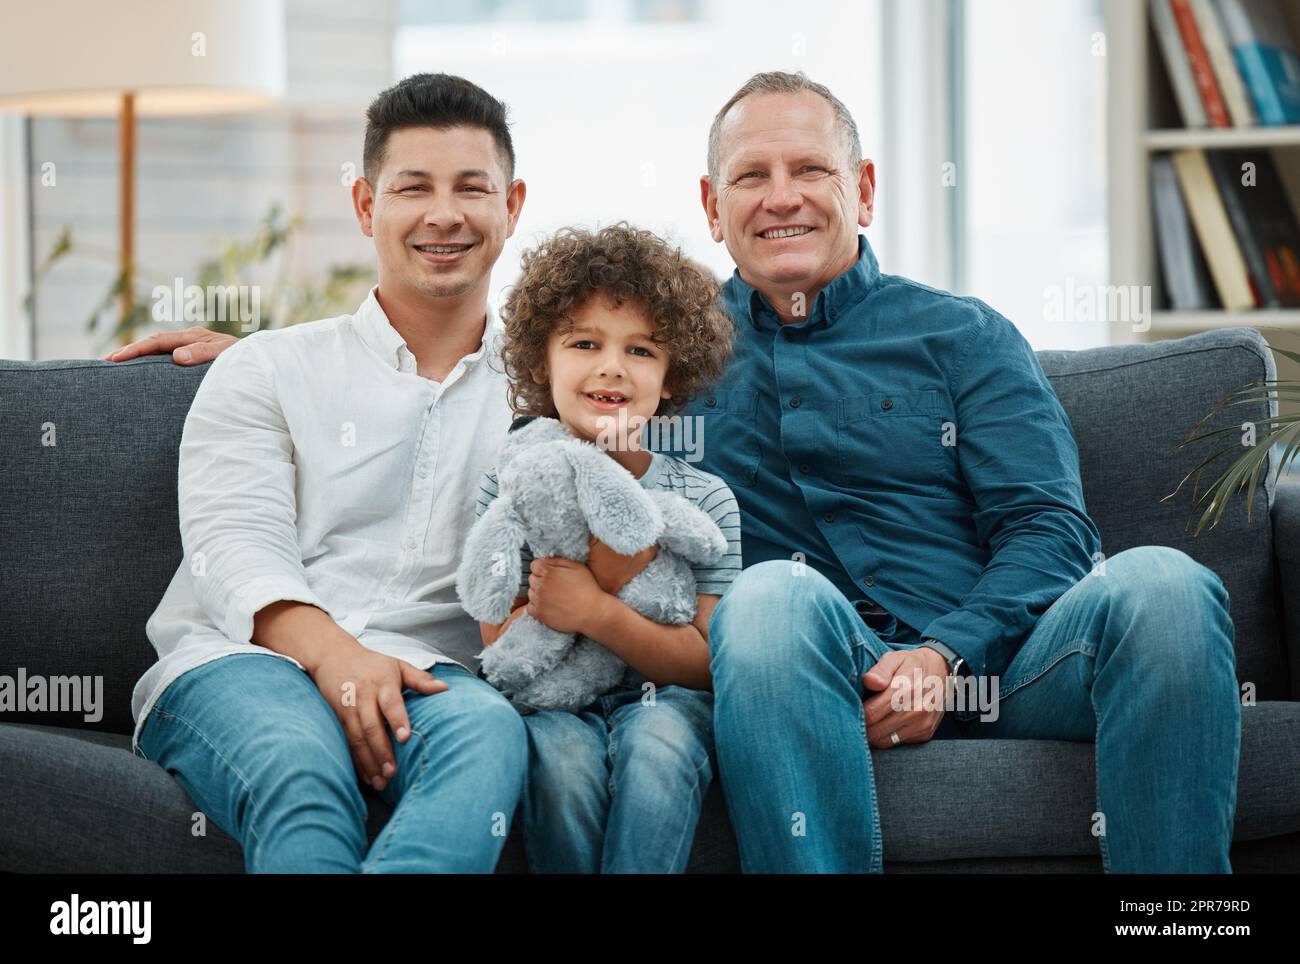 Two generations of strong men. a young man and his father spending time with his son. Stock Photo